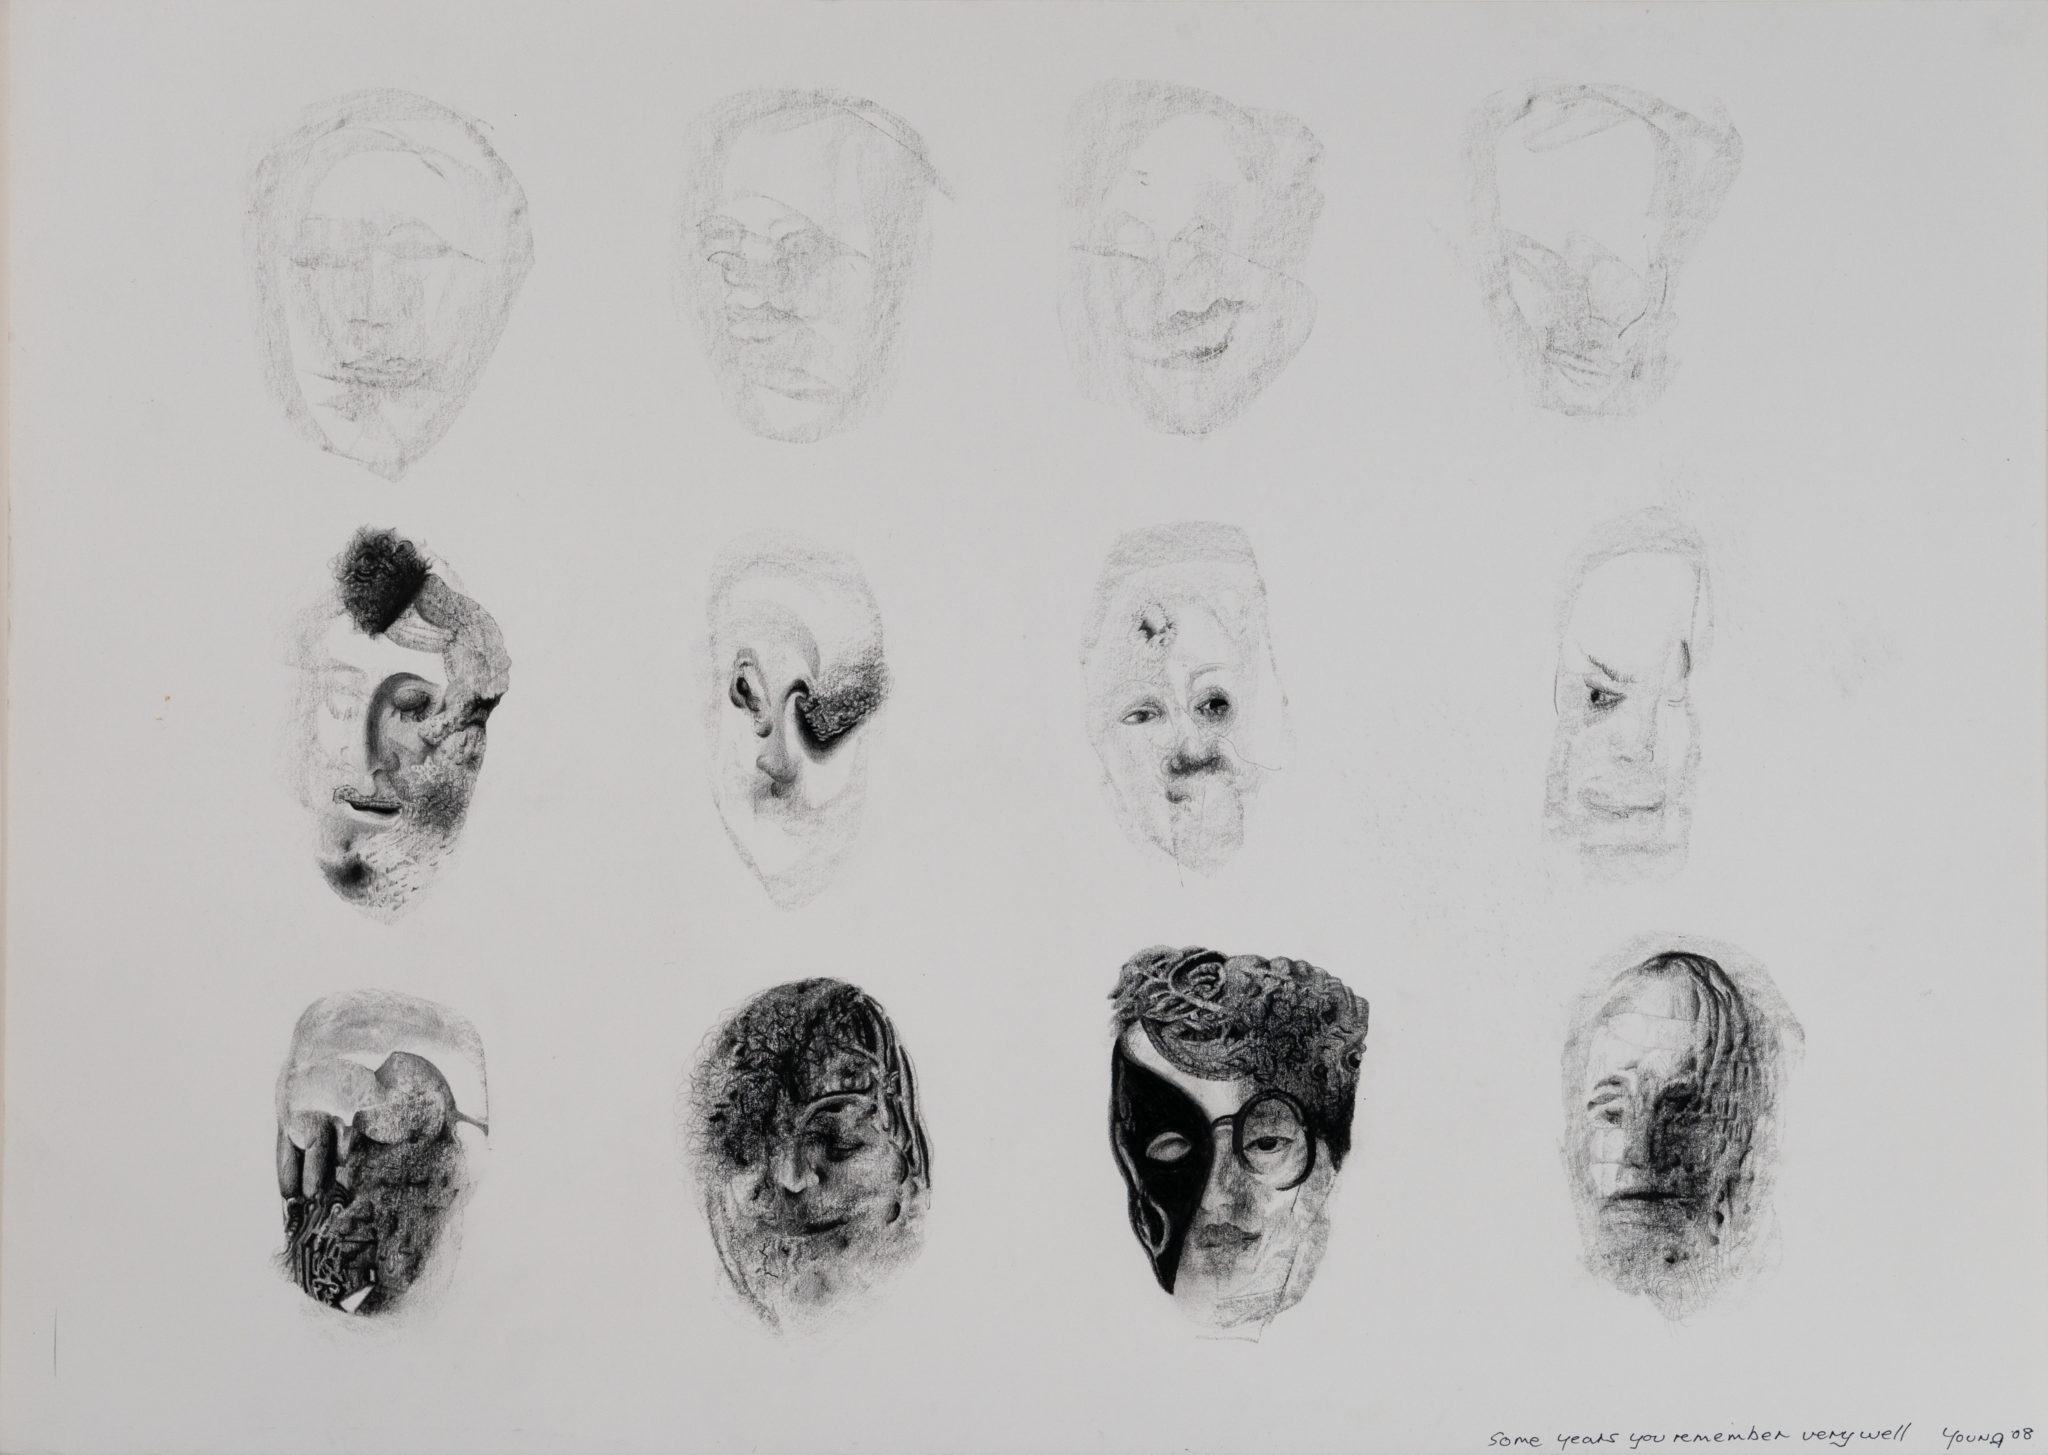 William (Bill) Young, Some years you remember very well, 2008, graphite on paper, 50.3 x 70.3 cm, Estate of William Young